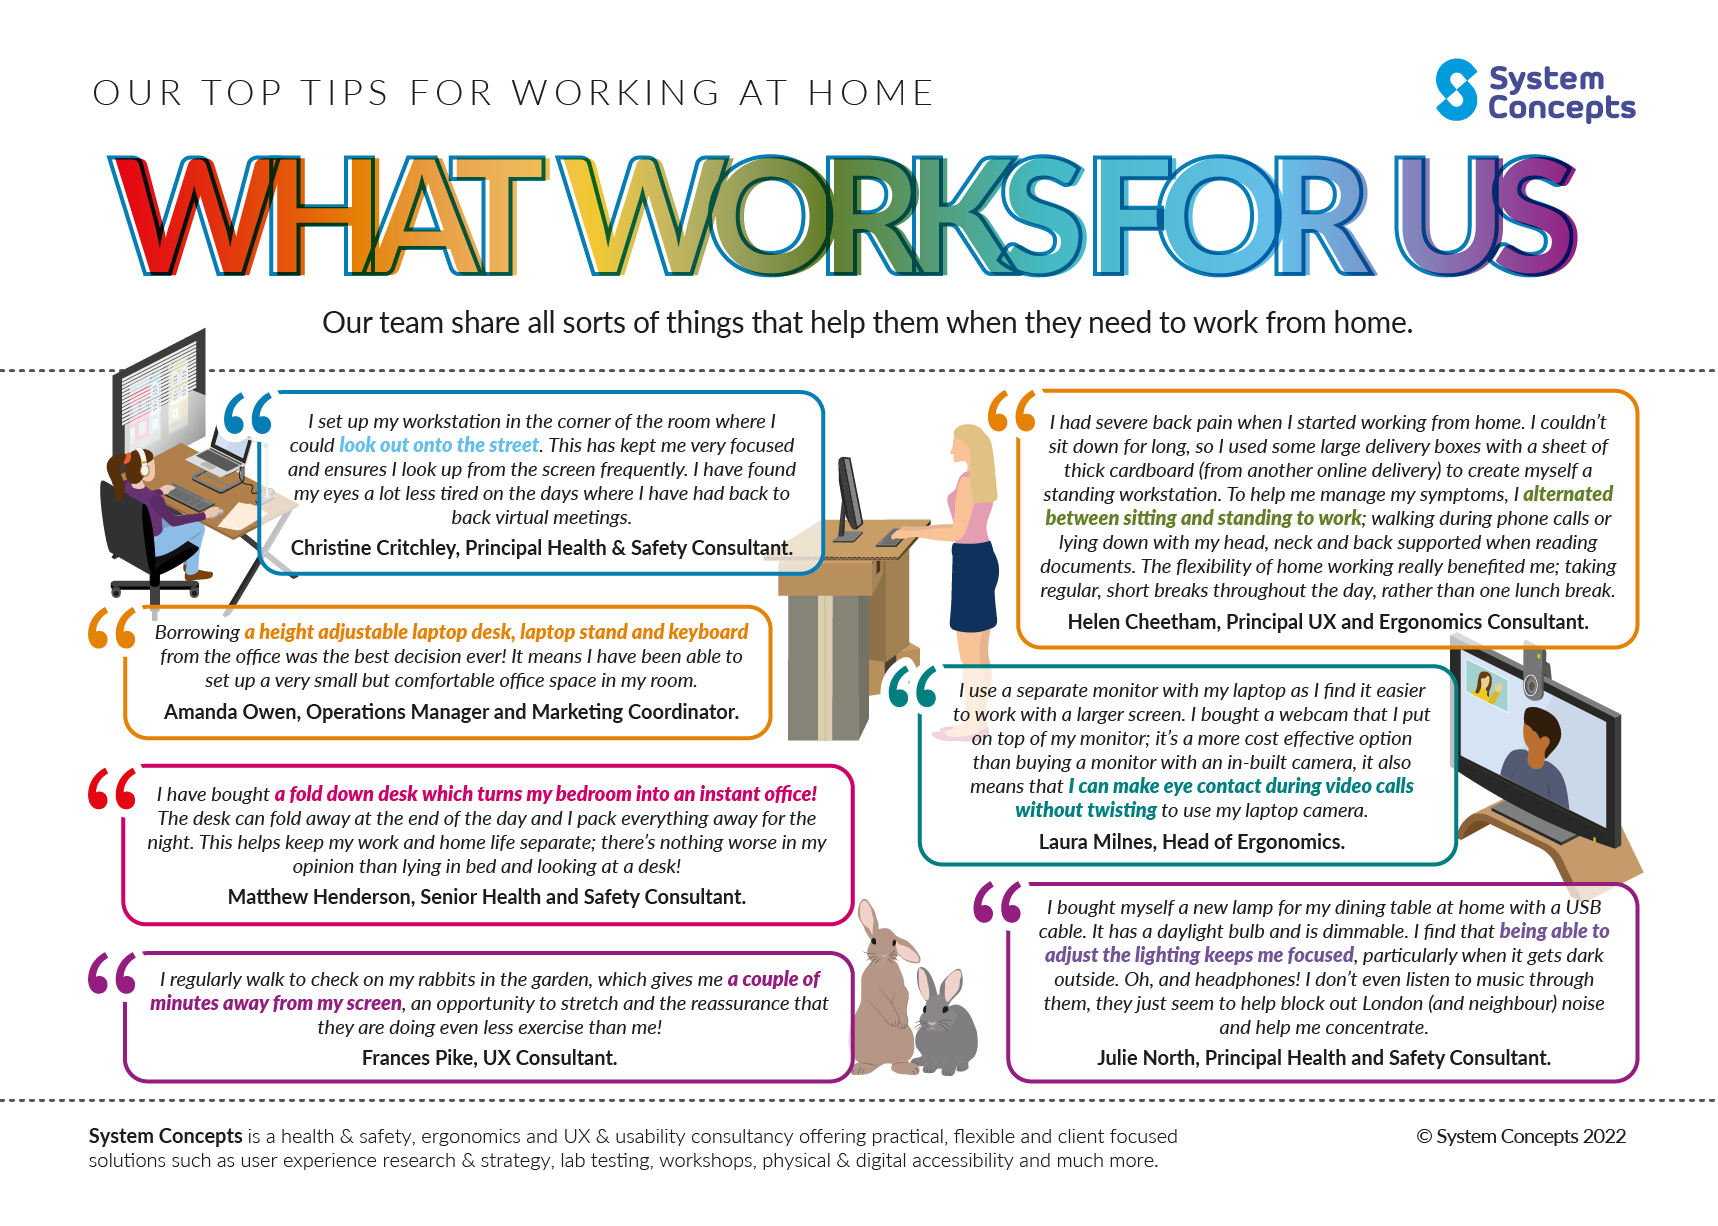 (alt="Working from home infographic, top ips from the team on what helped them")